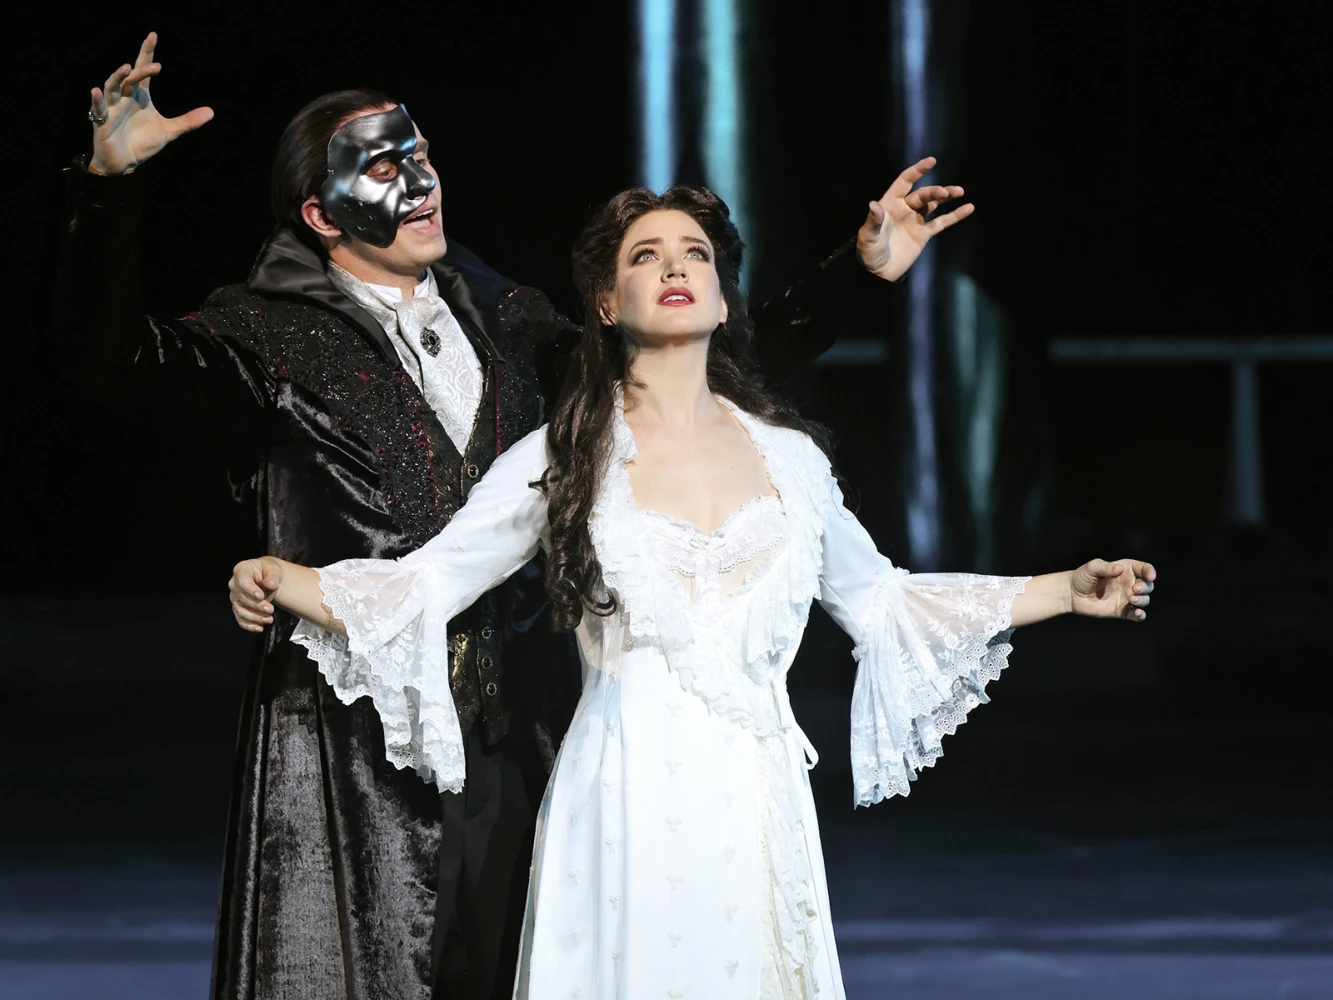 The Phantom of the Opera on Sydney Harbour: What to expect - 6